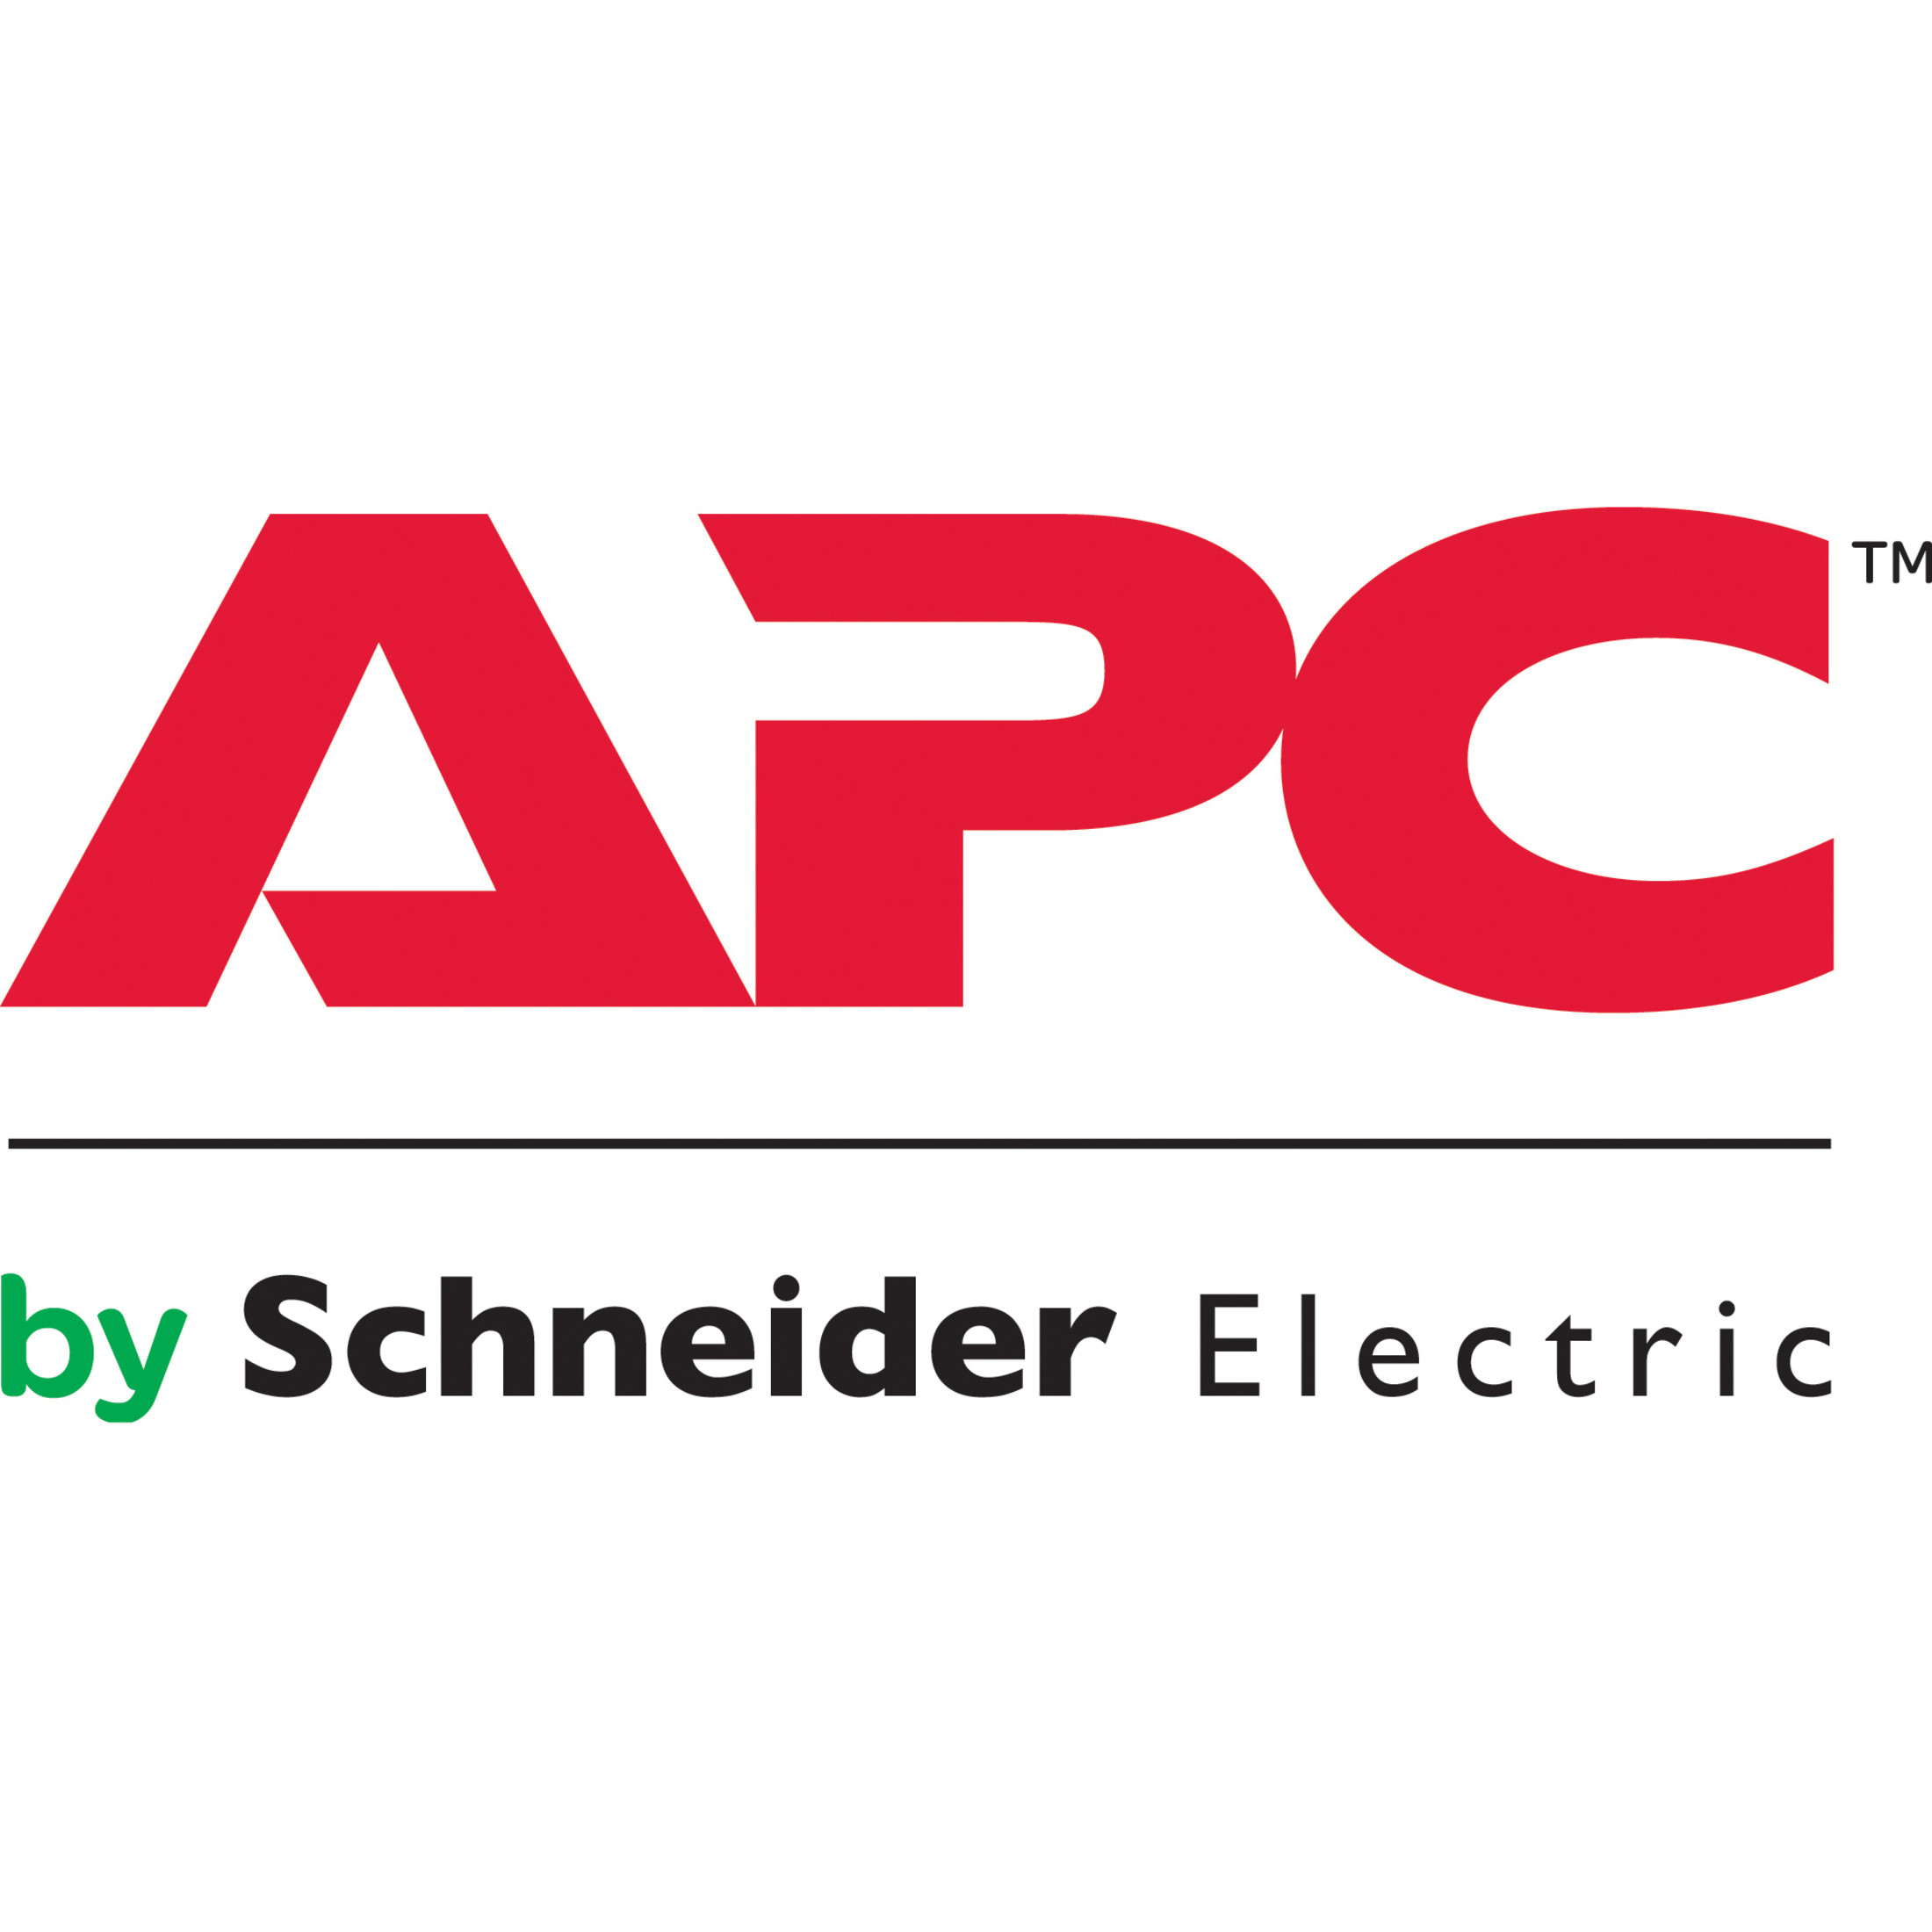 APC by Schneider Electric Start-UP ServiceService8 x 5Installation and StartupLaborElectronic and Physical WSTRTUP-VX-63